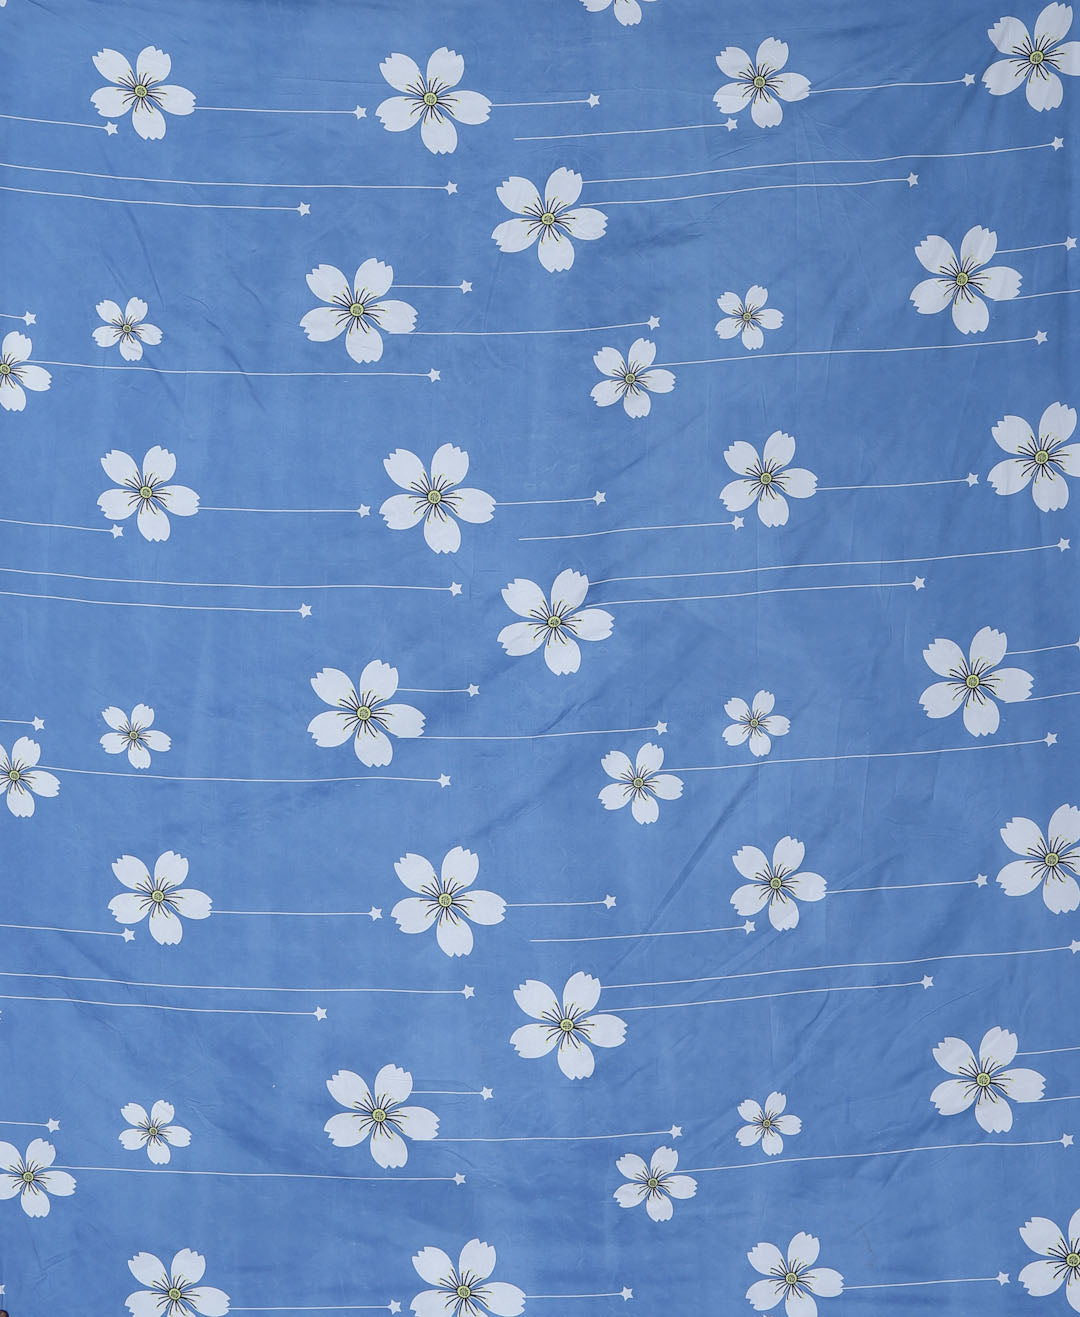 Klotthe Blue Floral 300 TC Cotton Blend Elasticated Double Bedsheet with 2 Pillow Covers